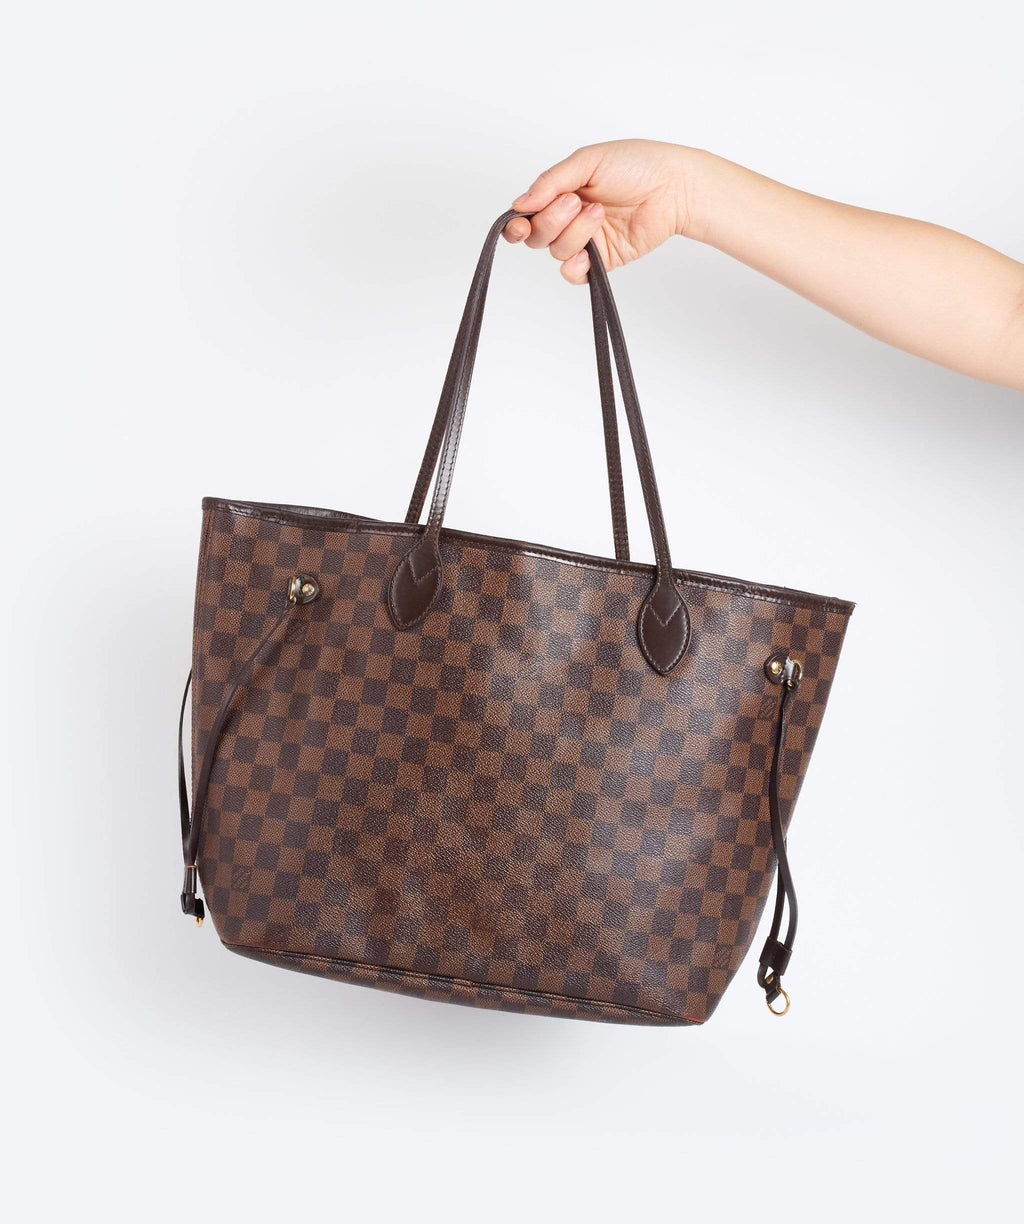 Settle an argument: are Louis Vuitton Neverfull tote bags a bit